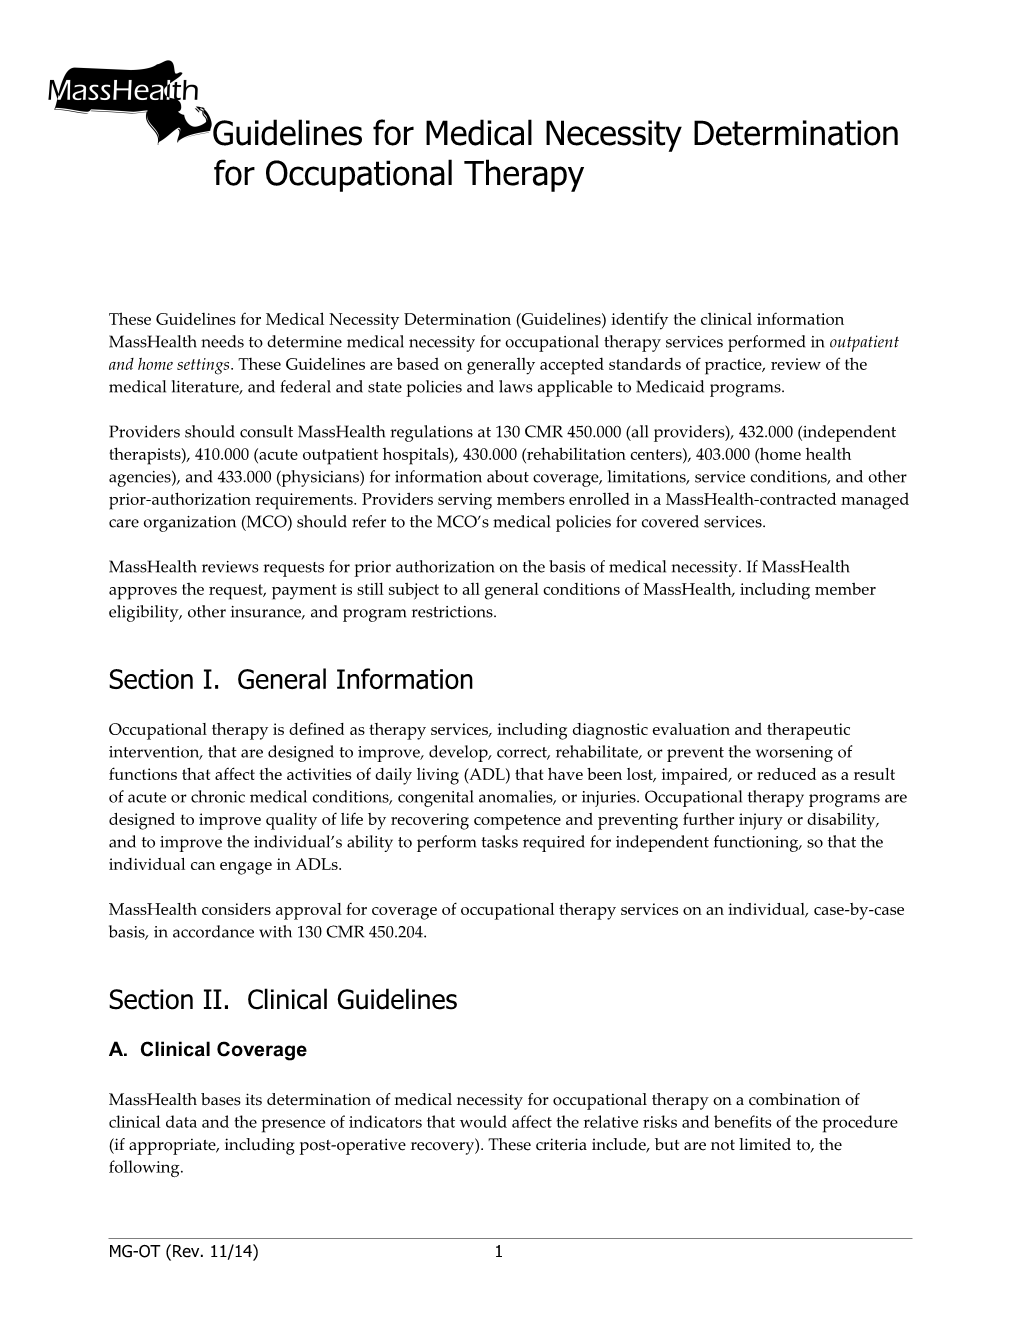 Guidelines for Medical Necessity Determination for Occupational Therapy